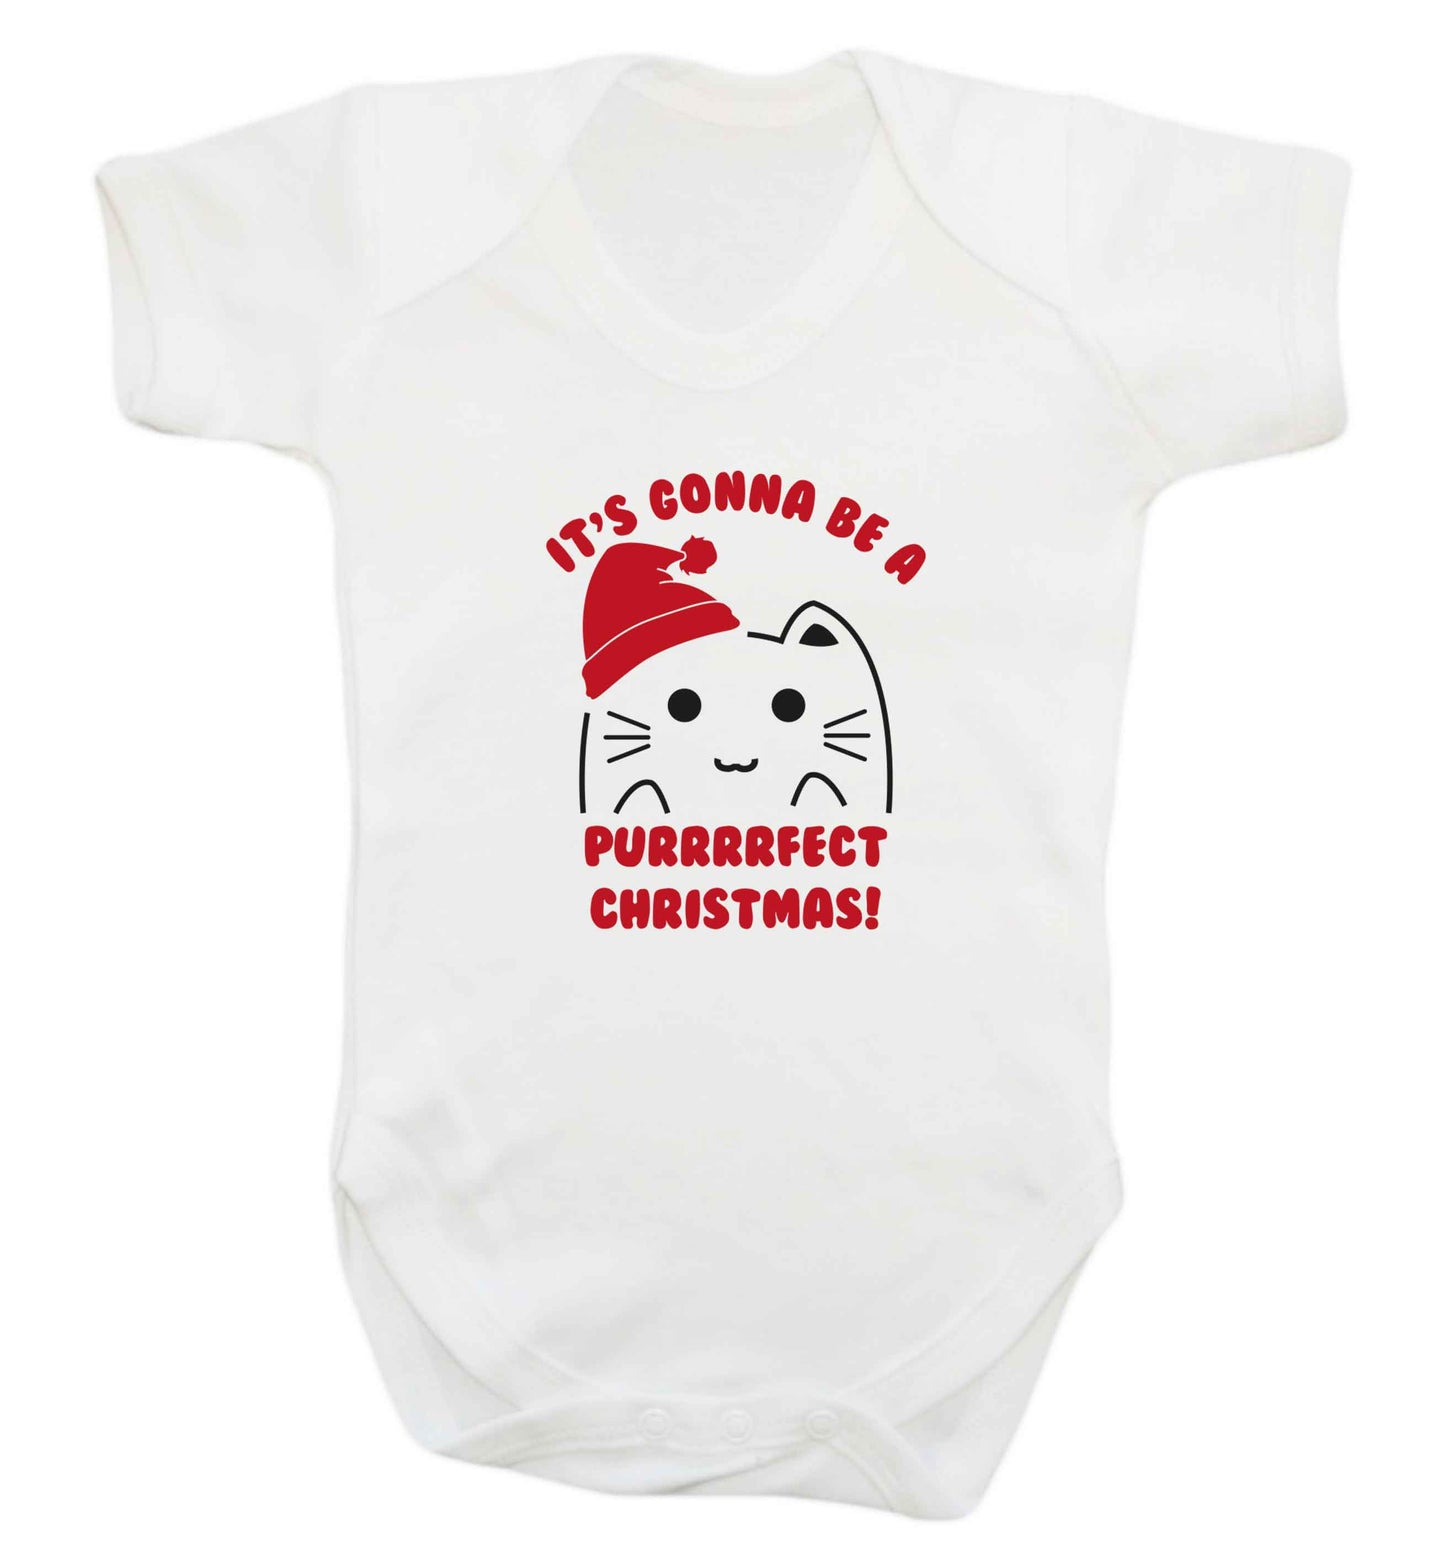 It's going to be a purrfect Christmas baby vest white 18-24 months